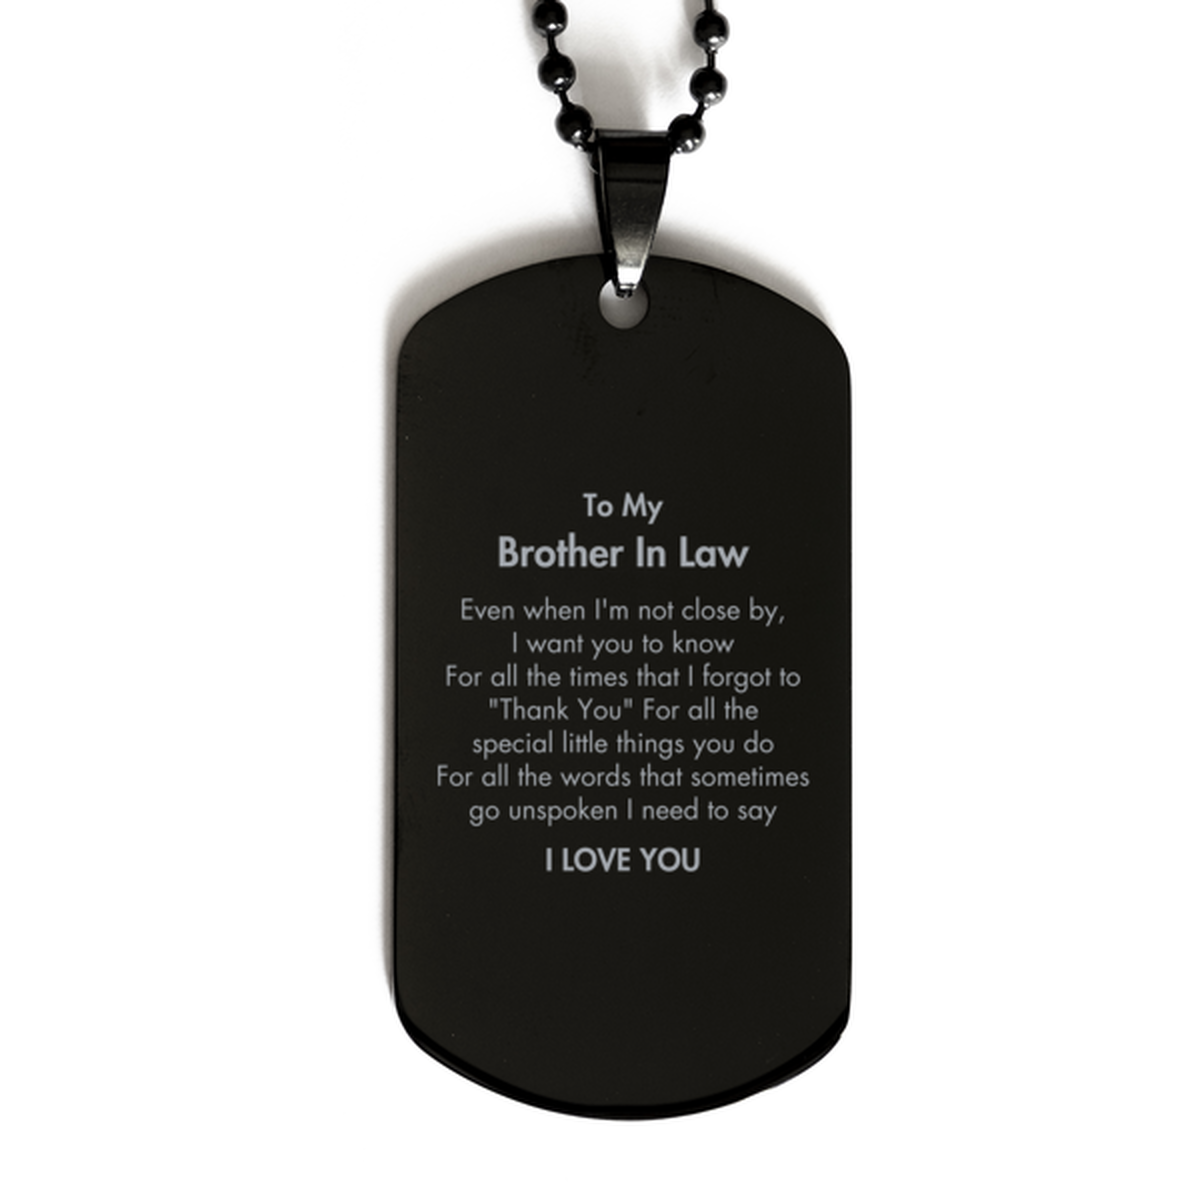 Thank You Gifts for Brother In Law, Keepsake Black Dog Tag Gifts for Brother In Law Birthday Mother's day Father's Day Brother In Law For all the words That sometimes go unspoken I need to say I LOVE YOU